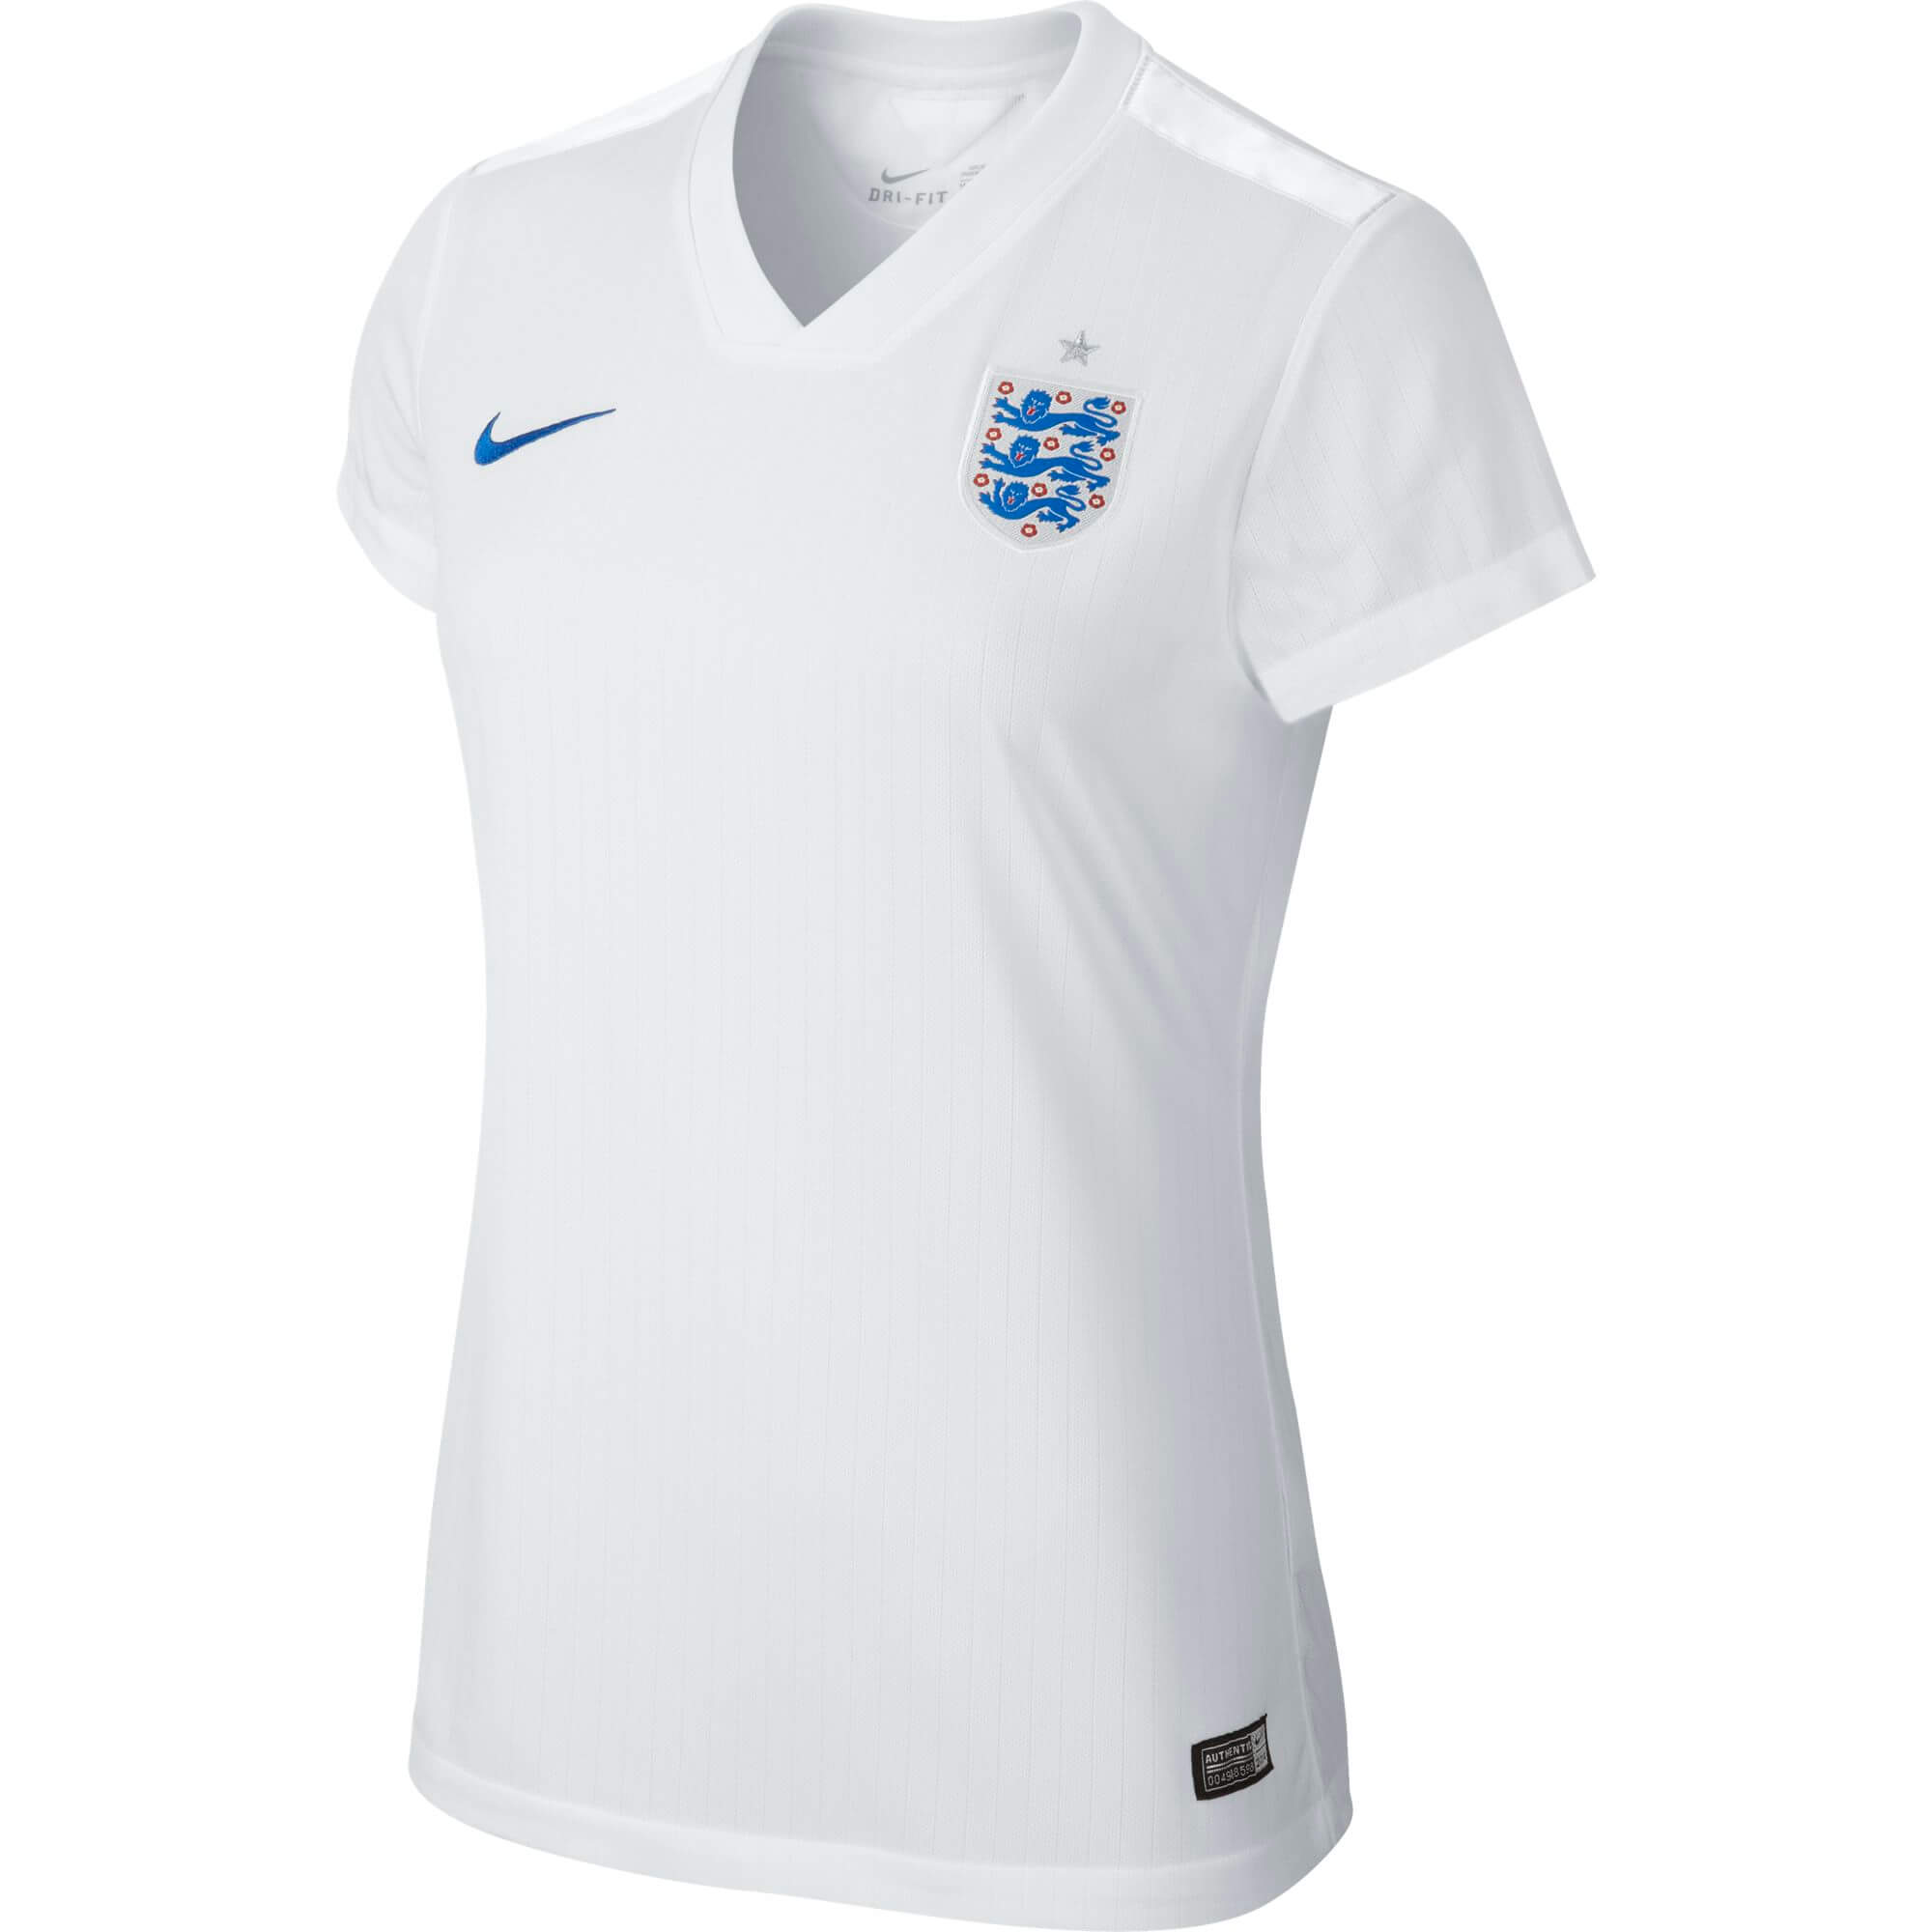 England World Cup 2014 Jersey